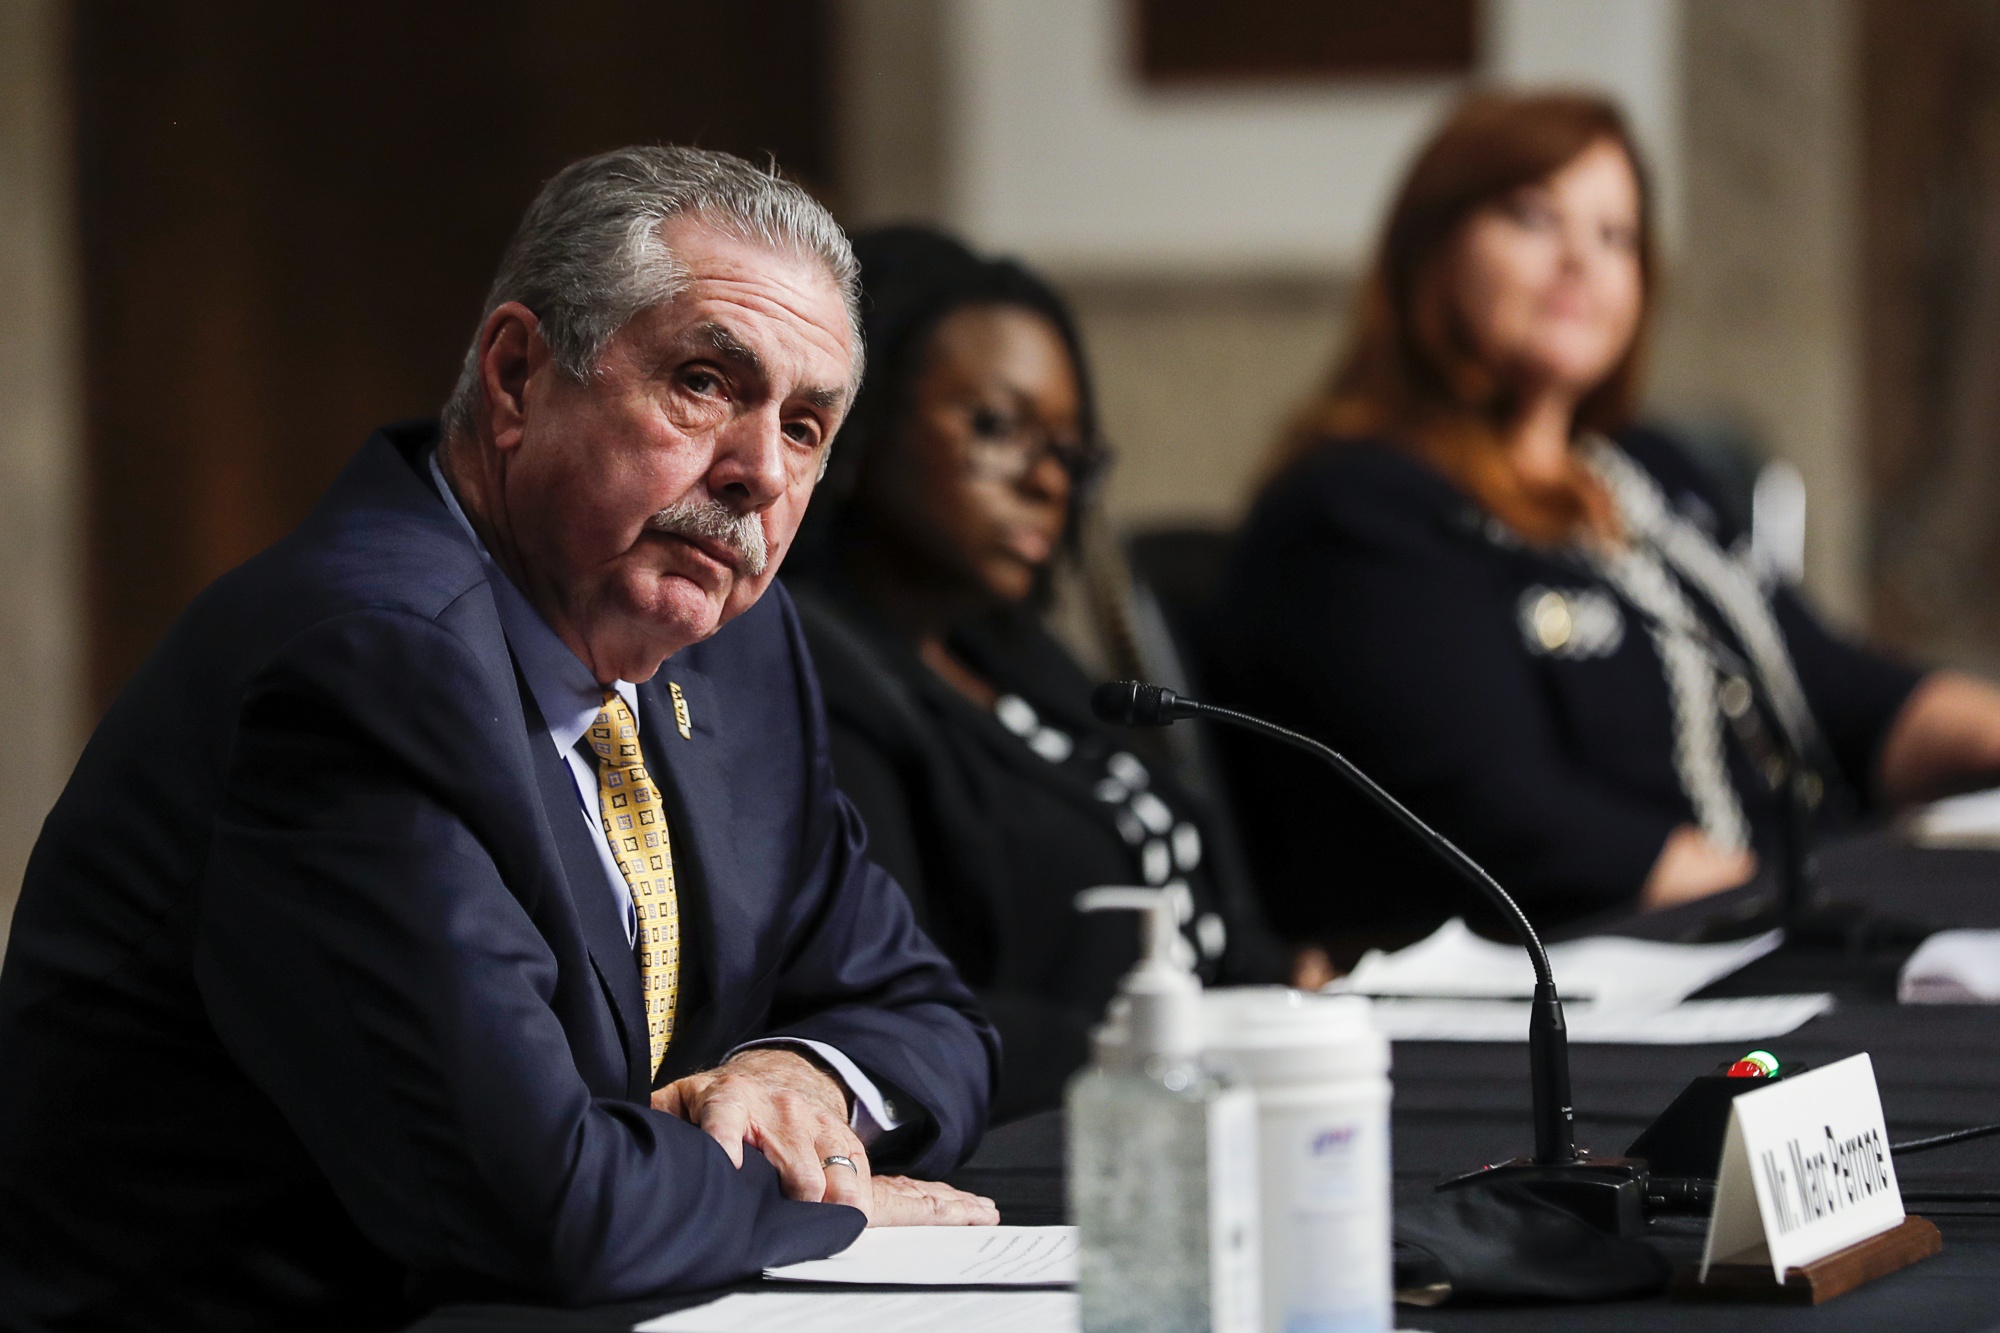 Marc Perrone testifies during a Senate Judiciary Committee hearing in Washington, D.C., on May 12.